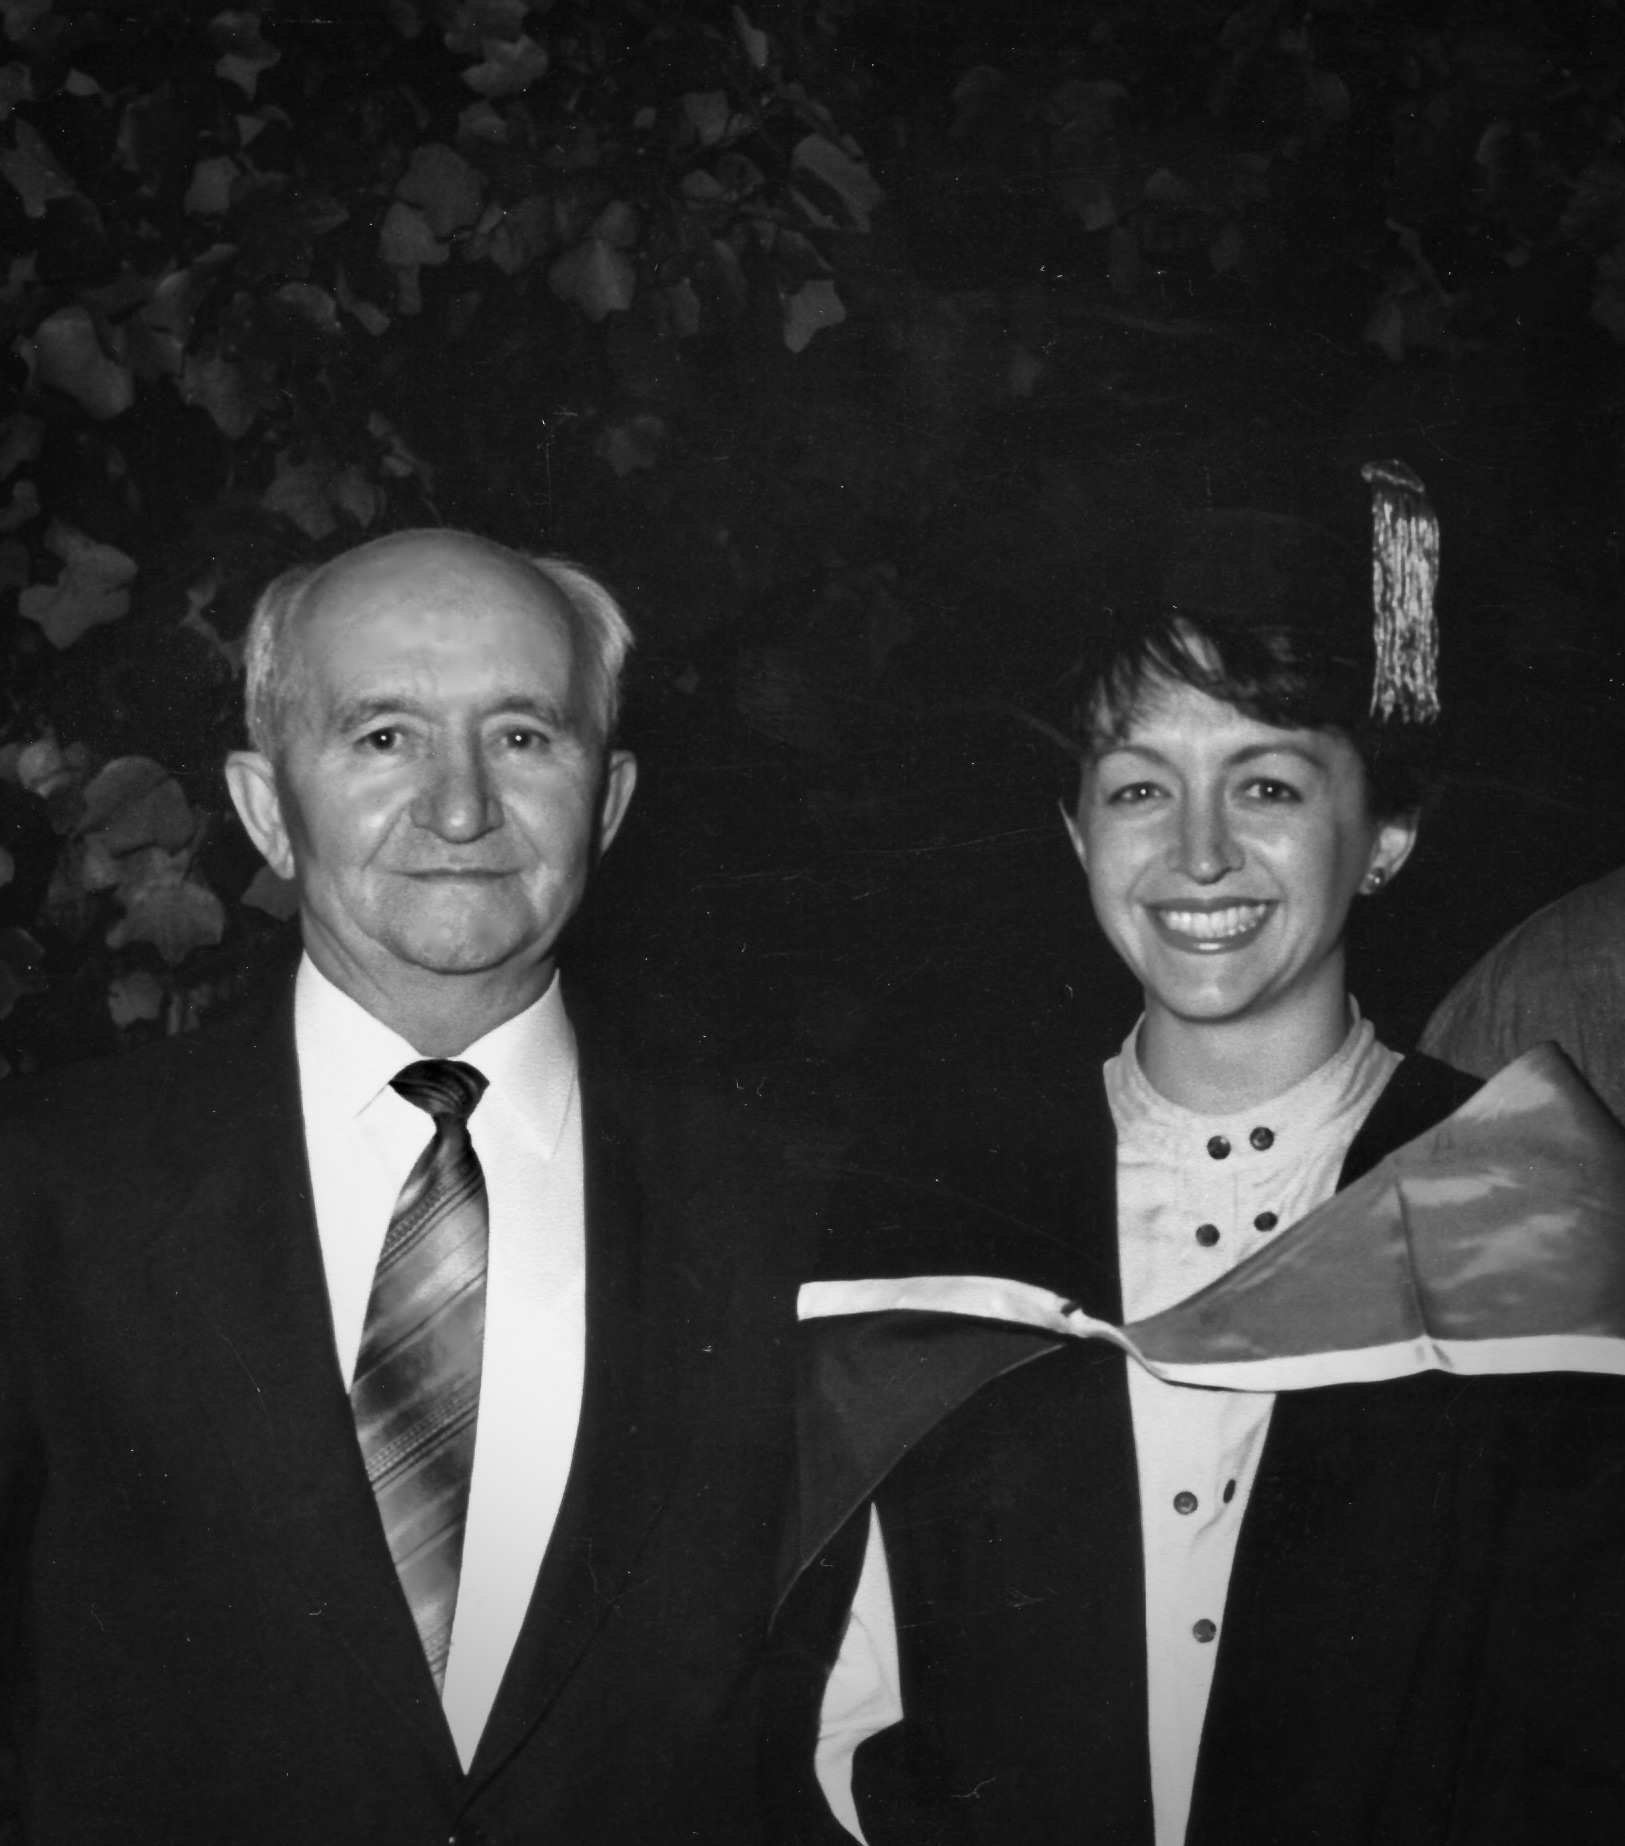 With my father Leonid (1919-2007) one of the kindest and most generous people I have ever met. Pictured together here after my Graduation Ceremony (a Postgraduate Degree in Educational Administration) The University of Melbourne (Carlton Campus) Australia. 14 March 1990. C.Pleteshner archival photograph.